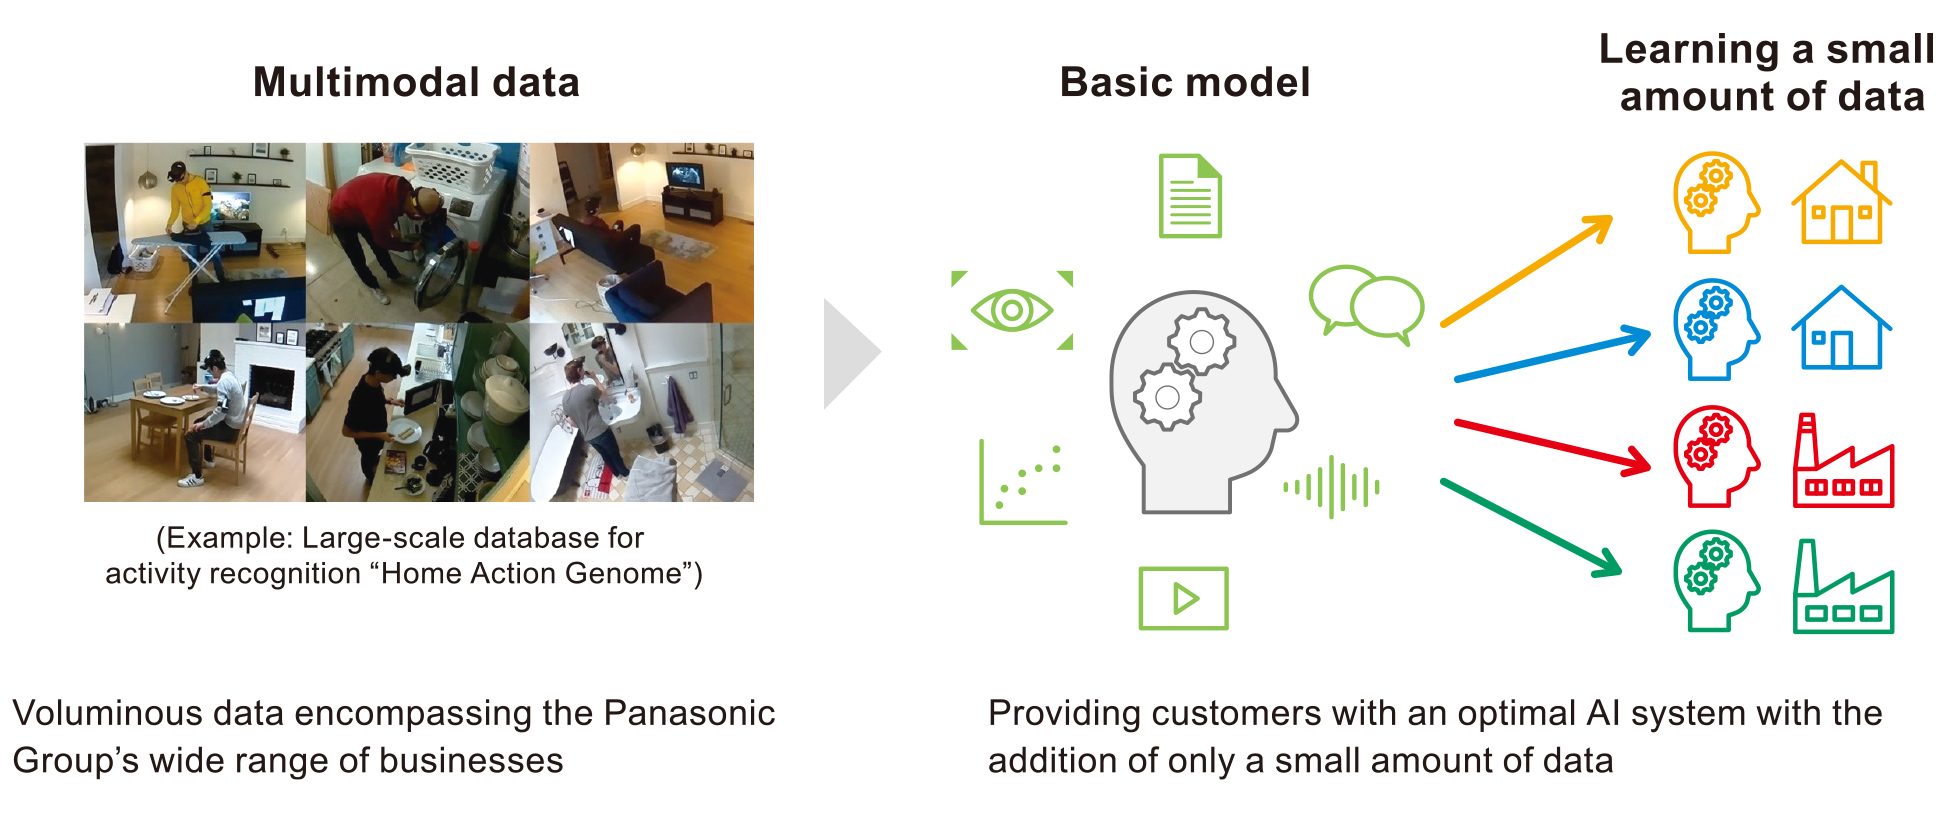 This diagram shows the basic model of AI. The Panasonic Group aims to build a foundation model from a large amount of data covering a wide range of business areas, and to deliver optimal AI with only a small amount of data for each application.